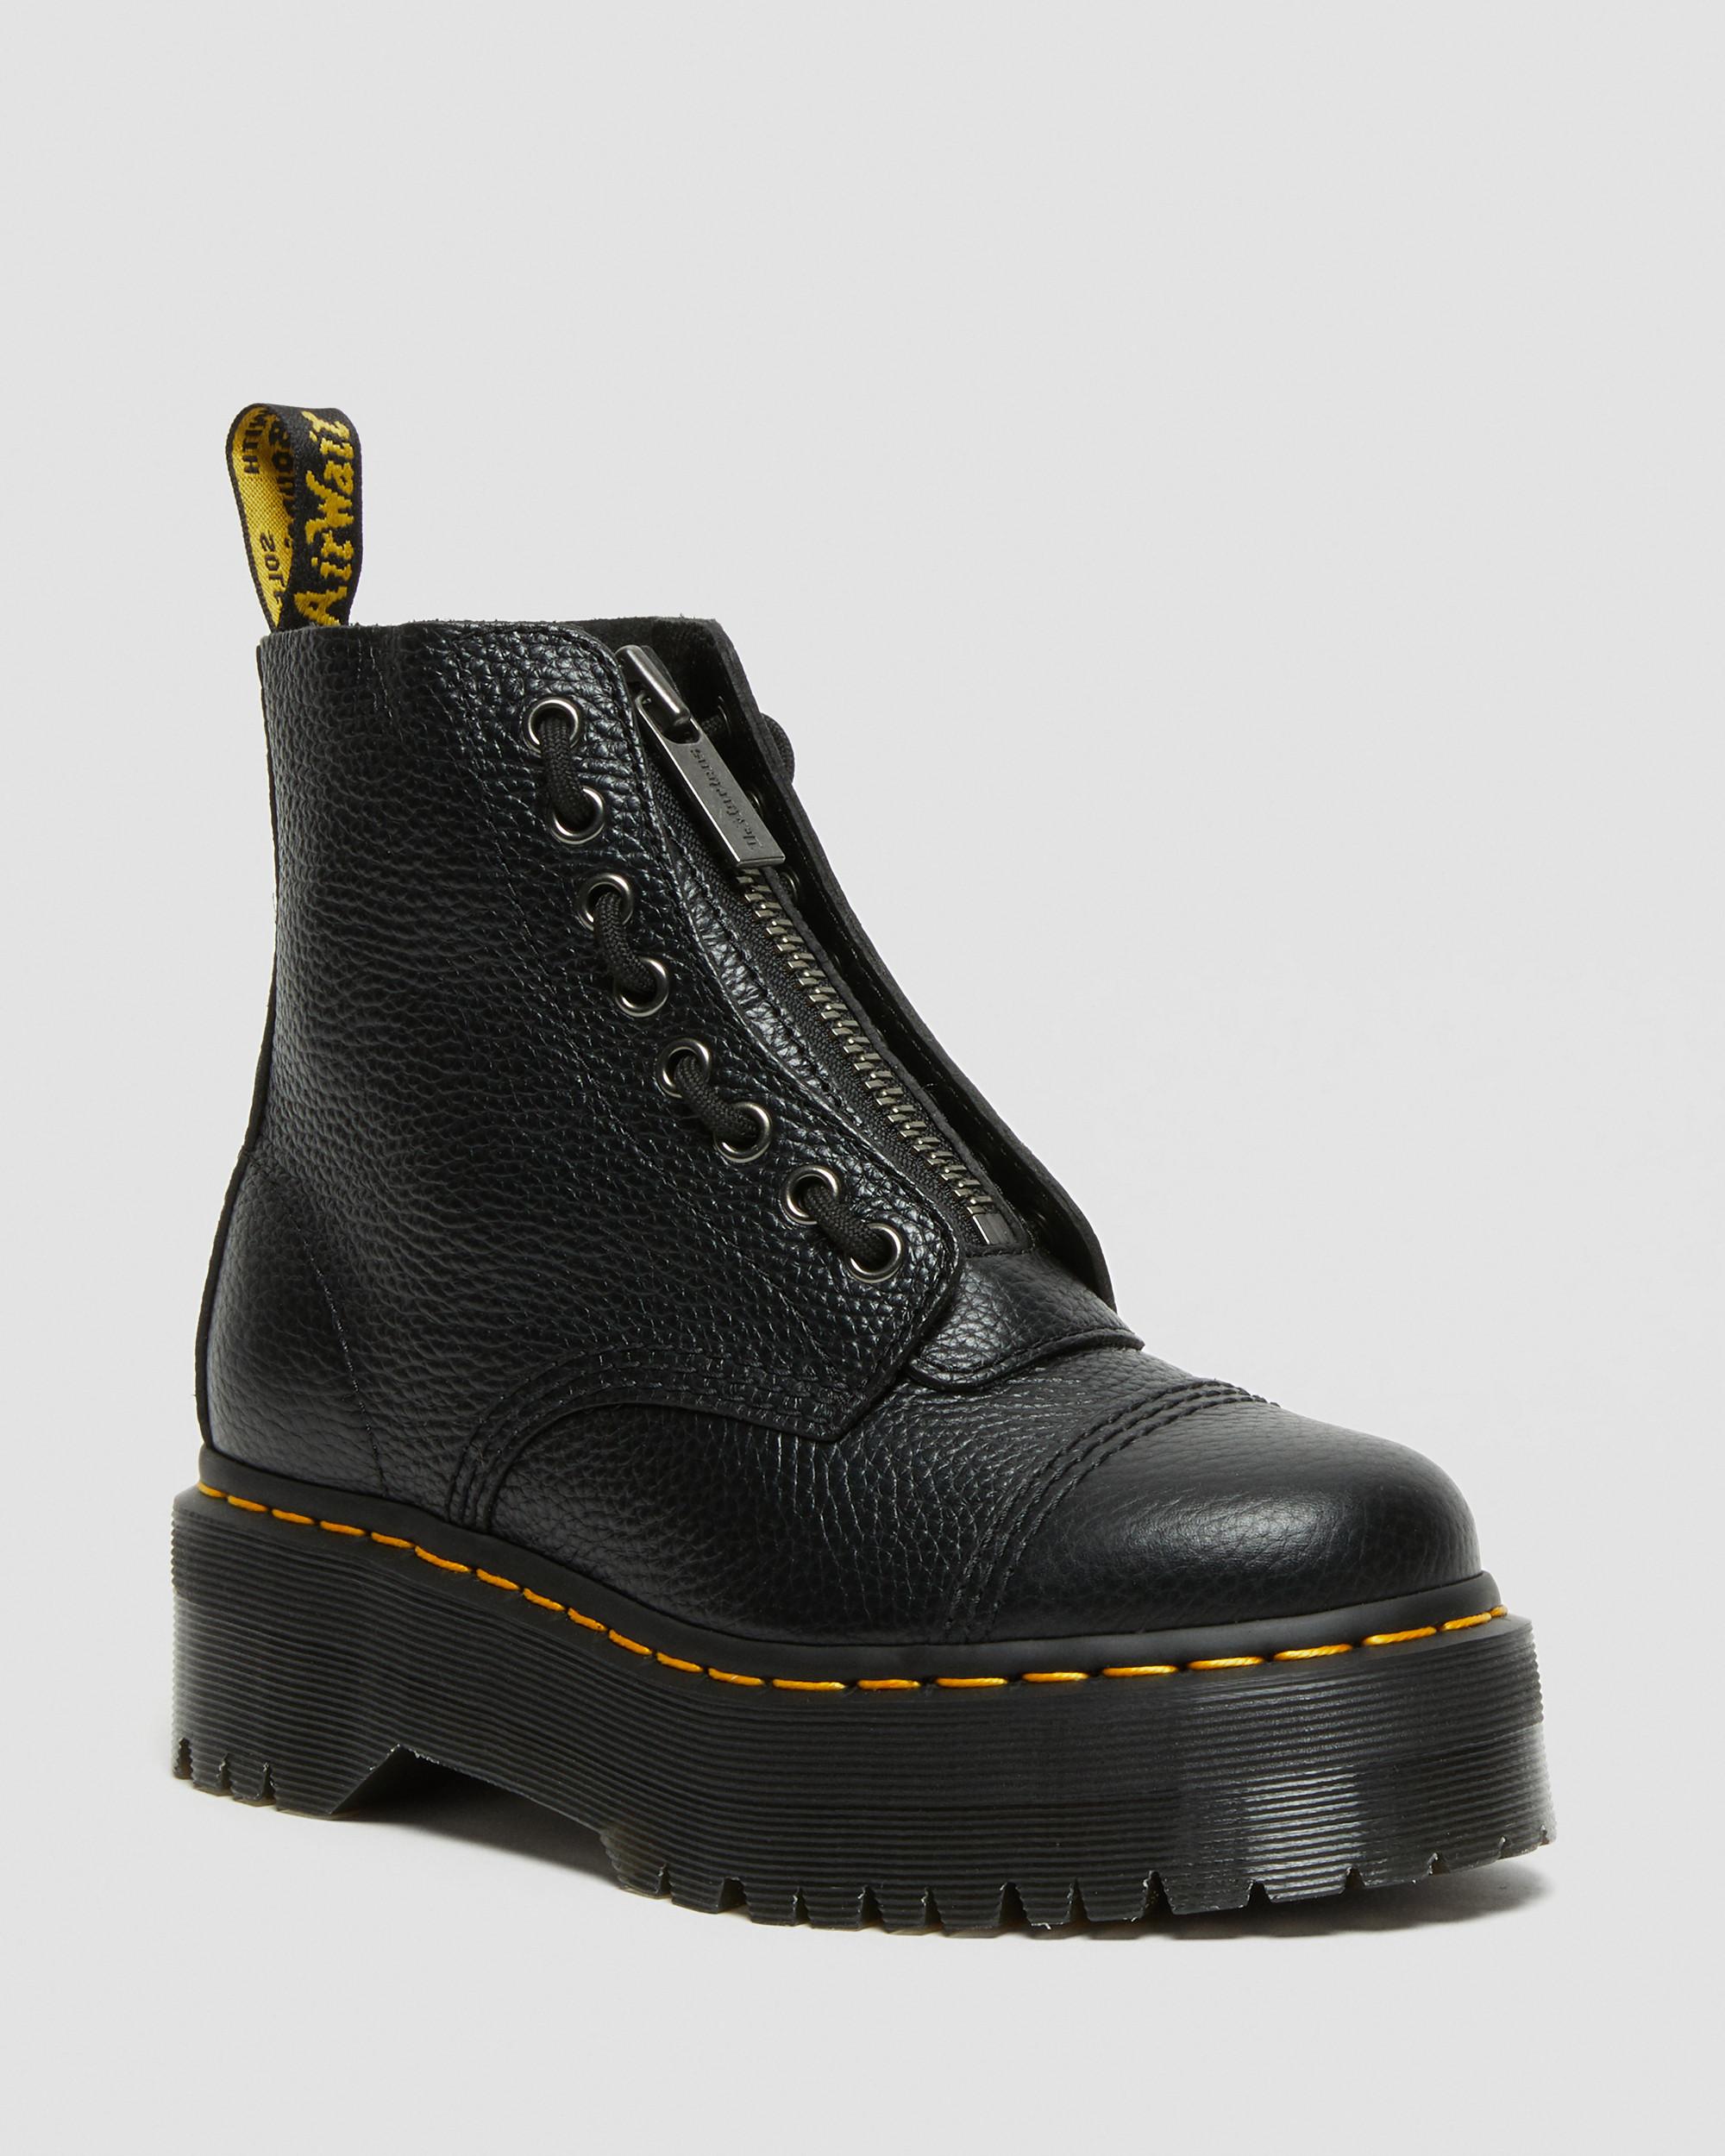 Sinclair Milled Nappa Leather Platform Boots in Black | Dr. Martens